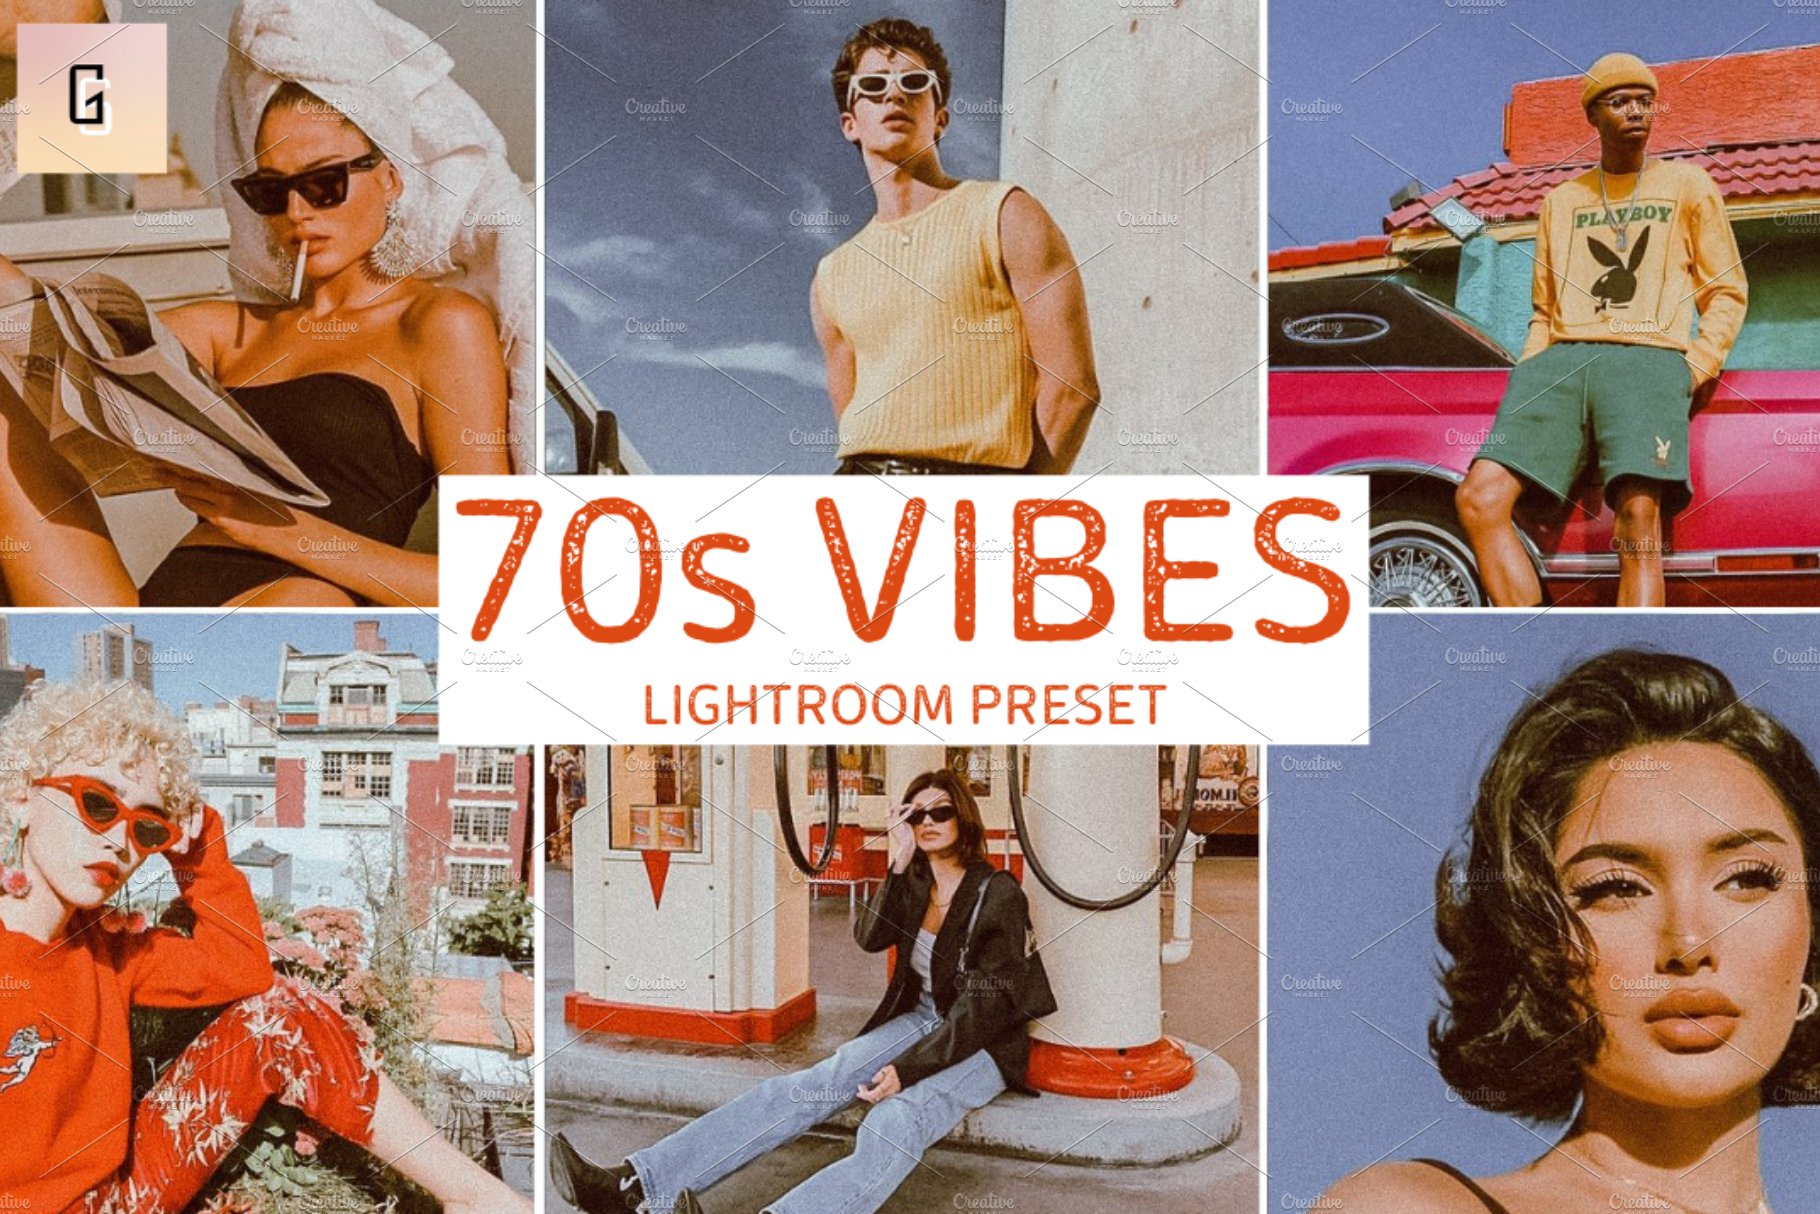 Lightroom Preset 70s VIBE by GALOR6Ecover image.